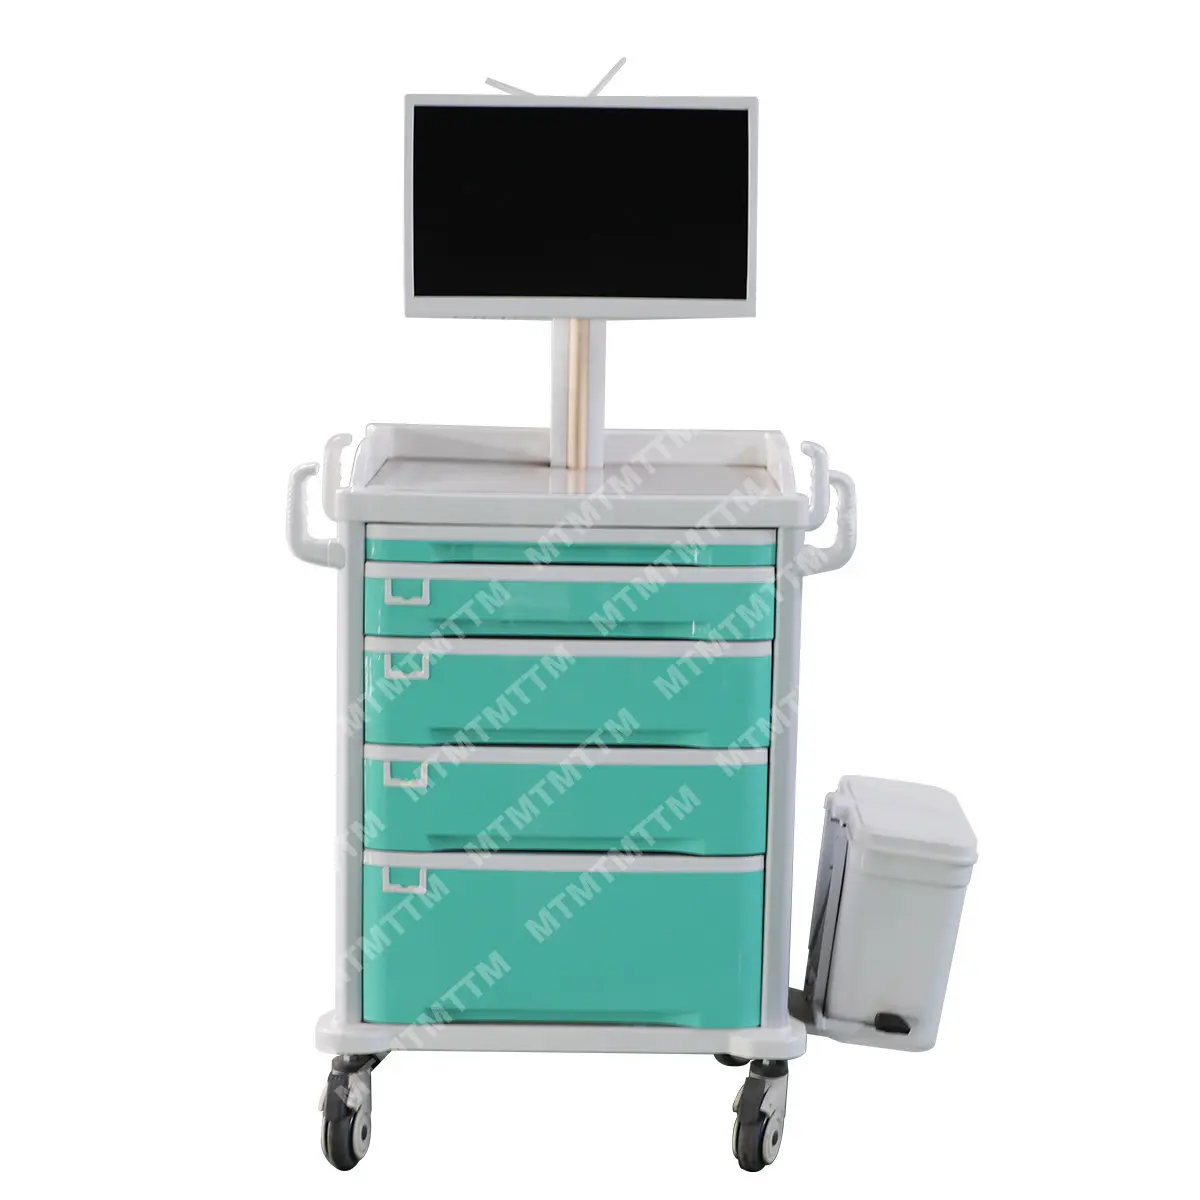 Hospital mobile working station wireless nursing medicine trolley with computer price